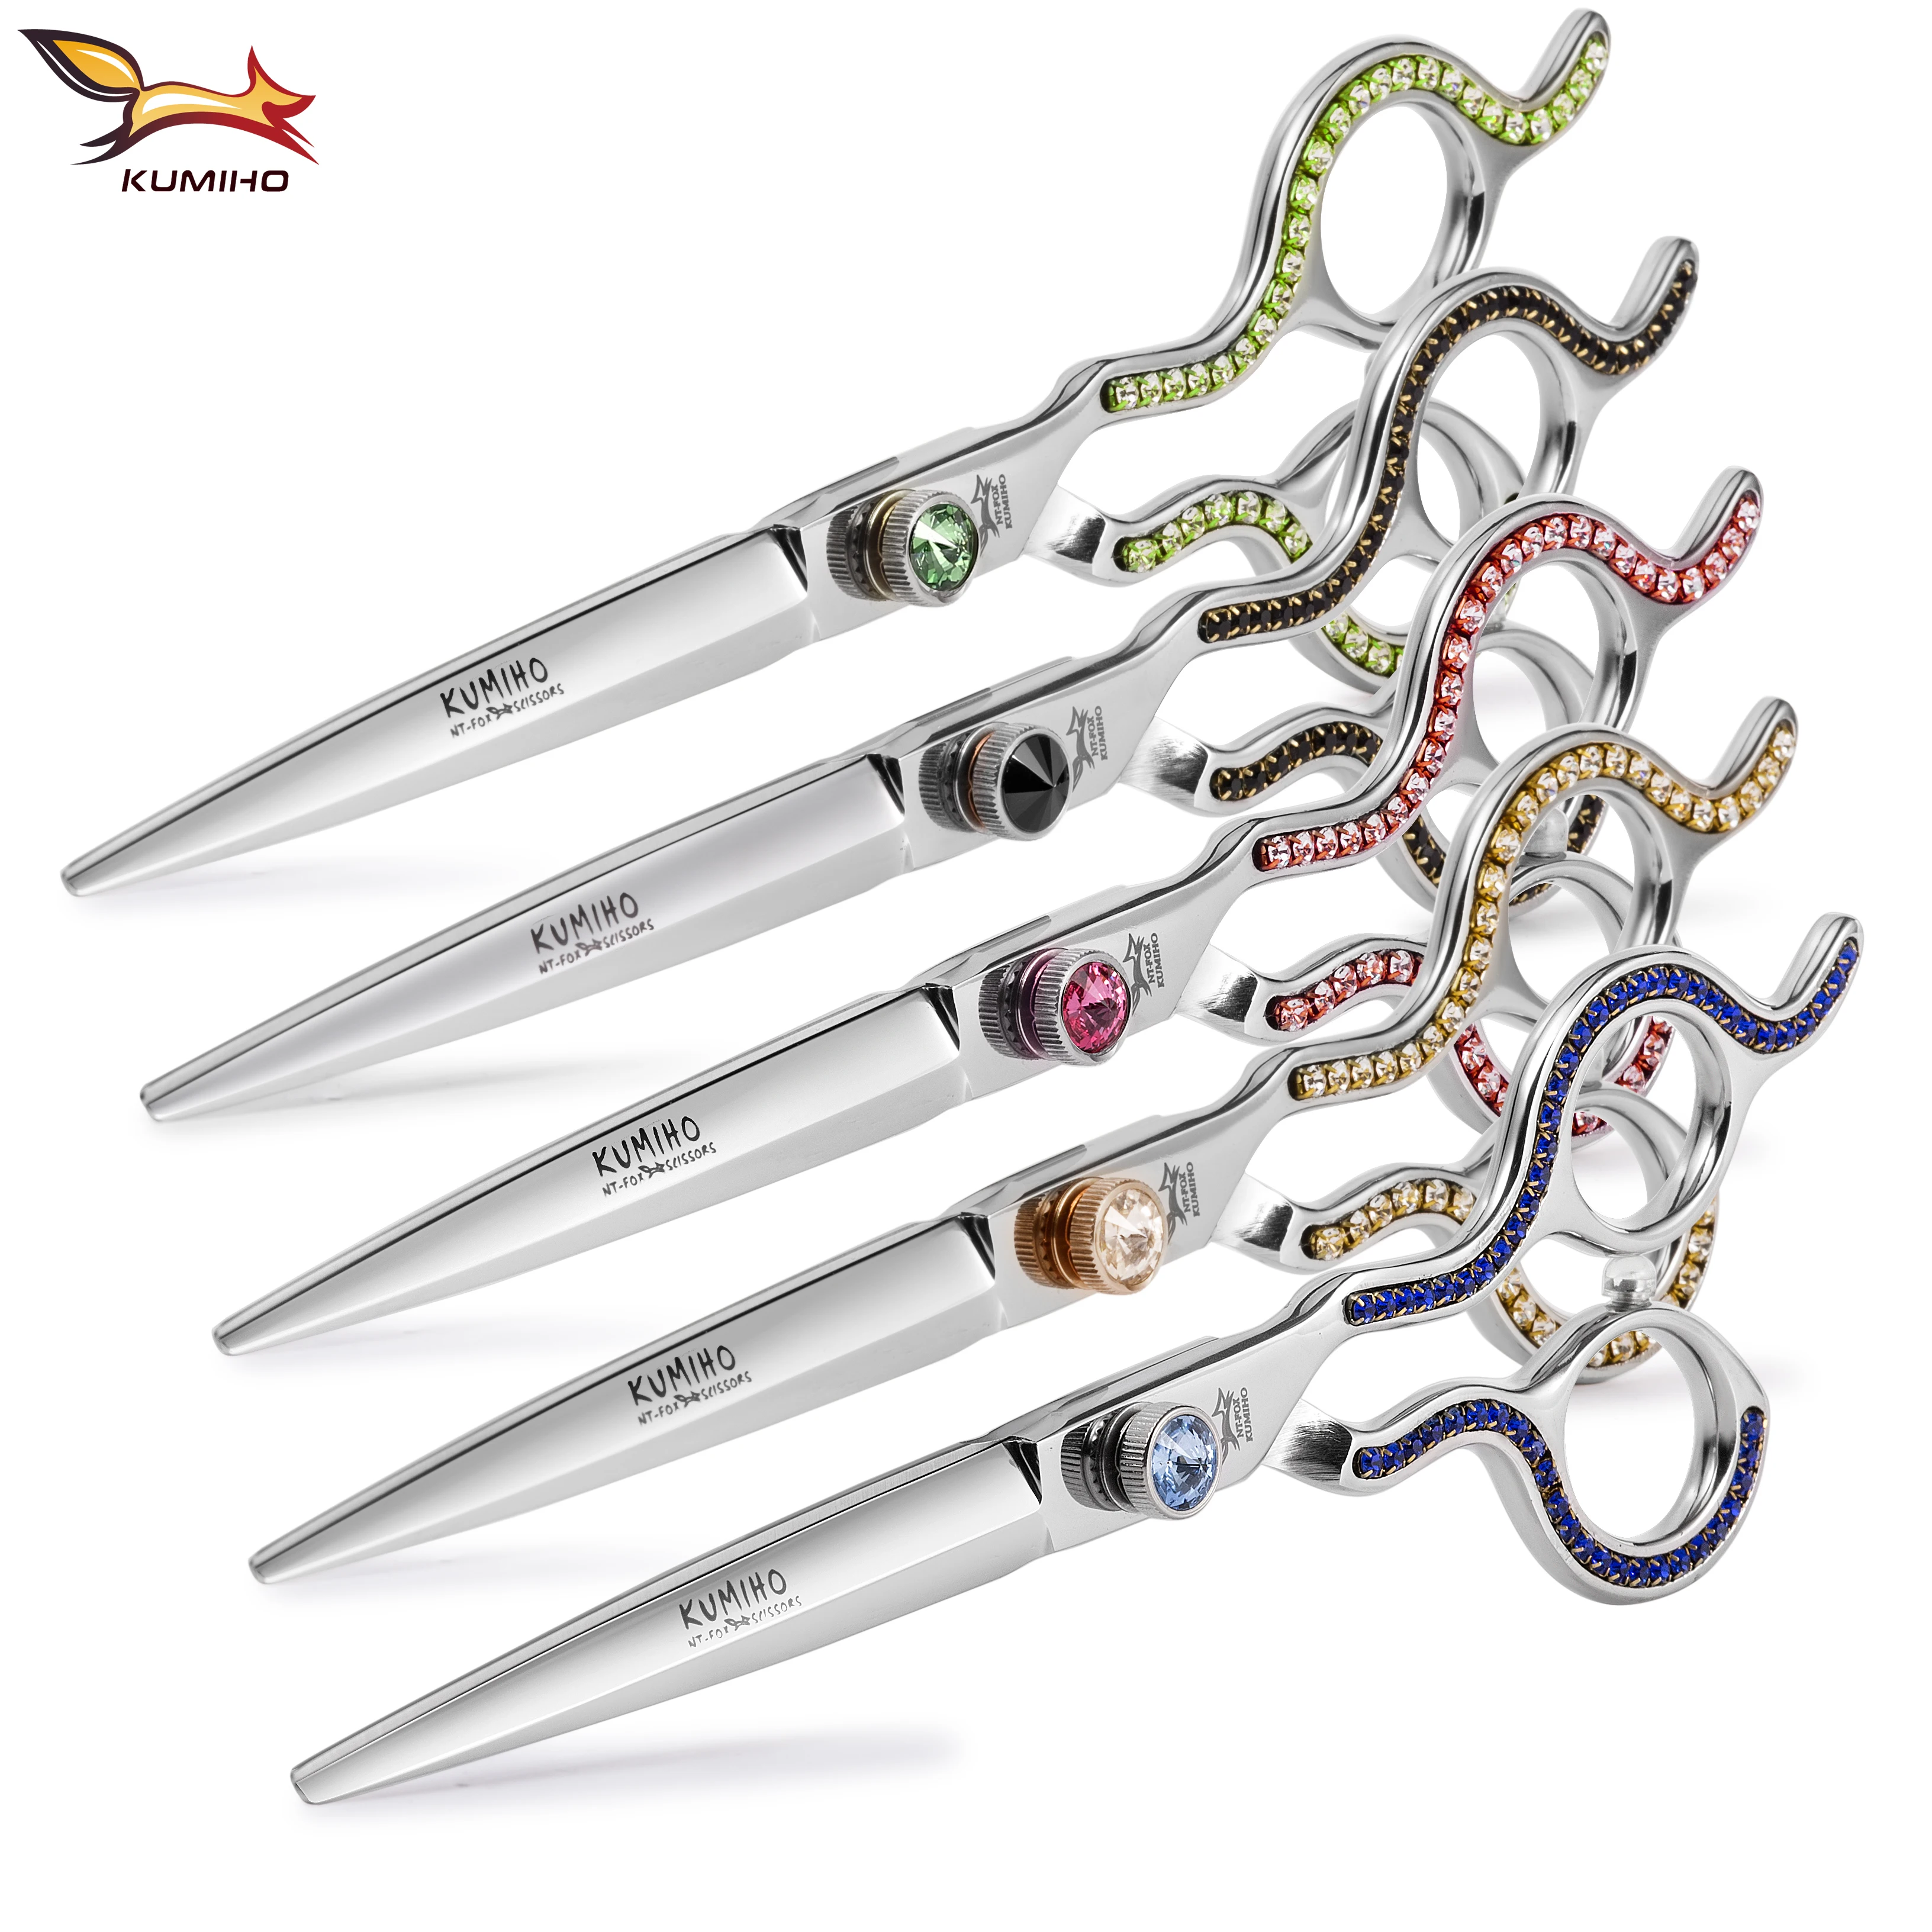 

KUMIHO 2019 New Arrival XZB-70 XZB-75 7" and 7.5" hair cutting scissors 5 colors available with crystal decoration